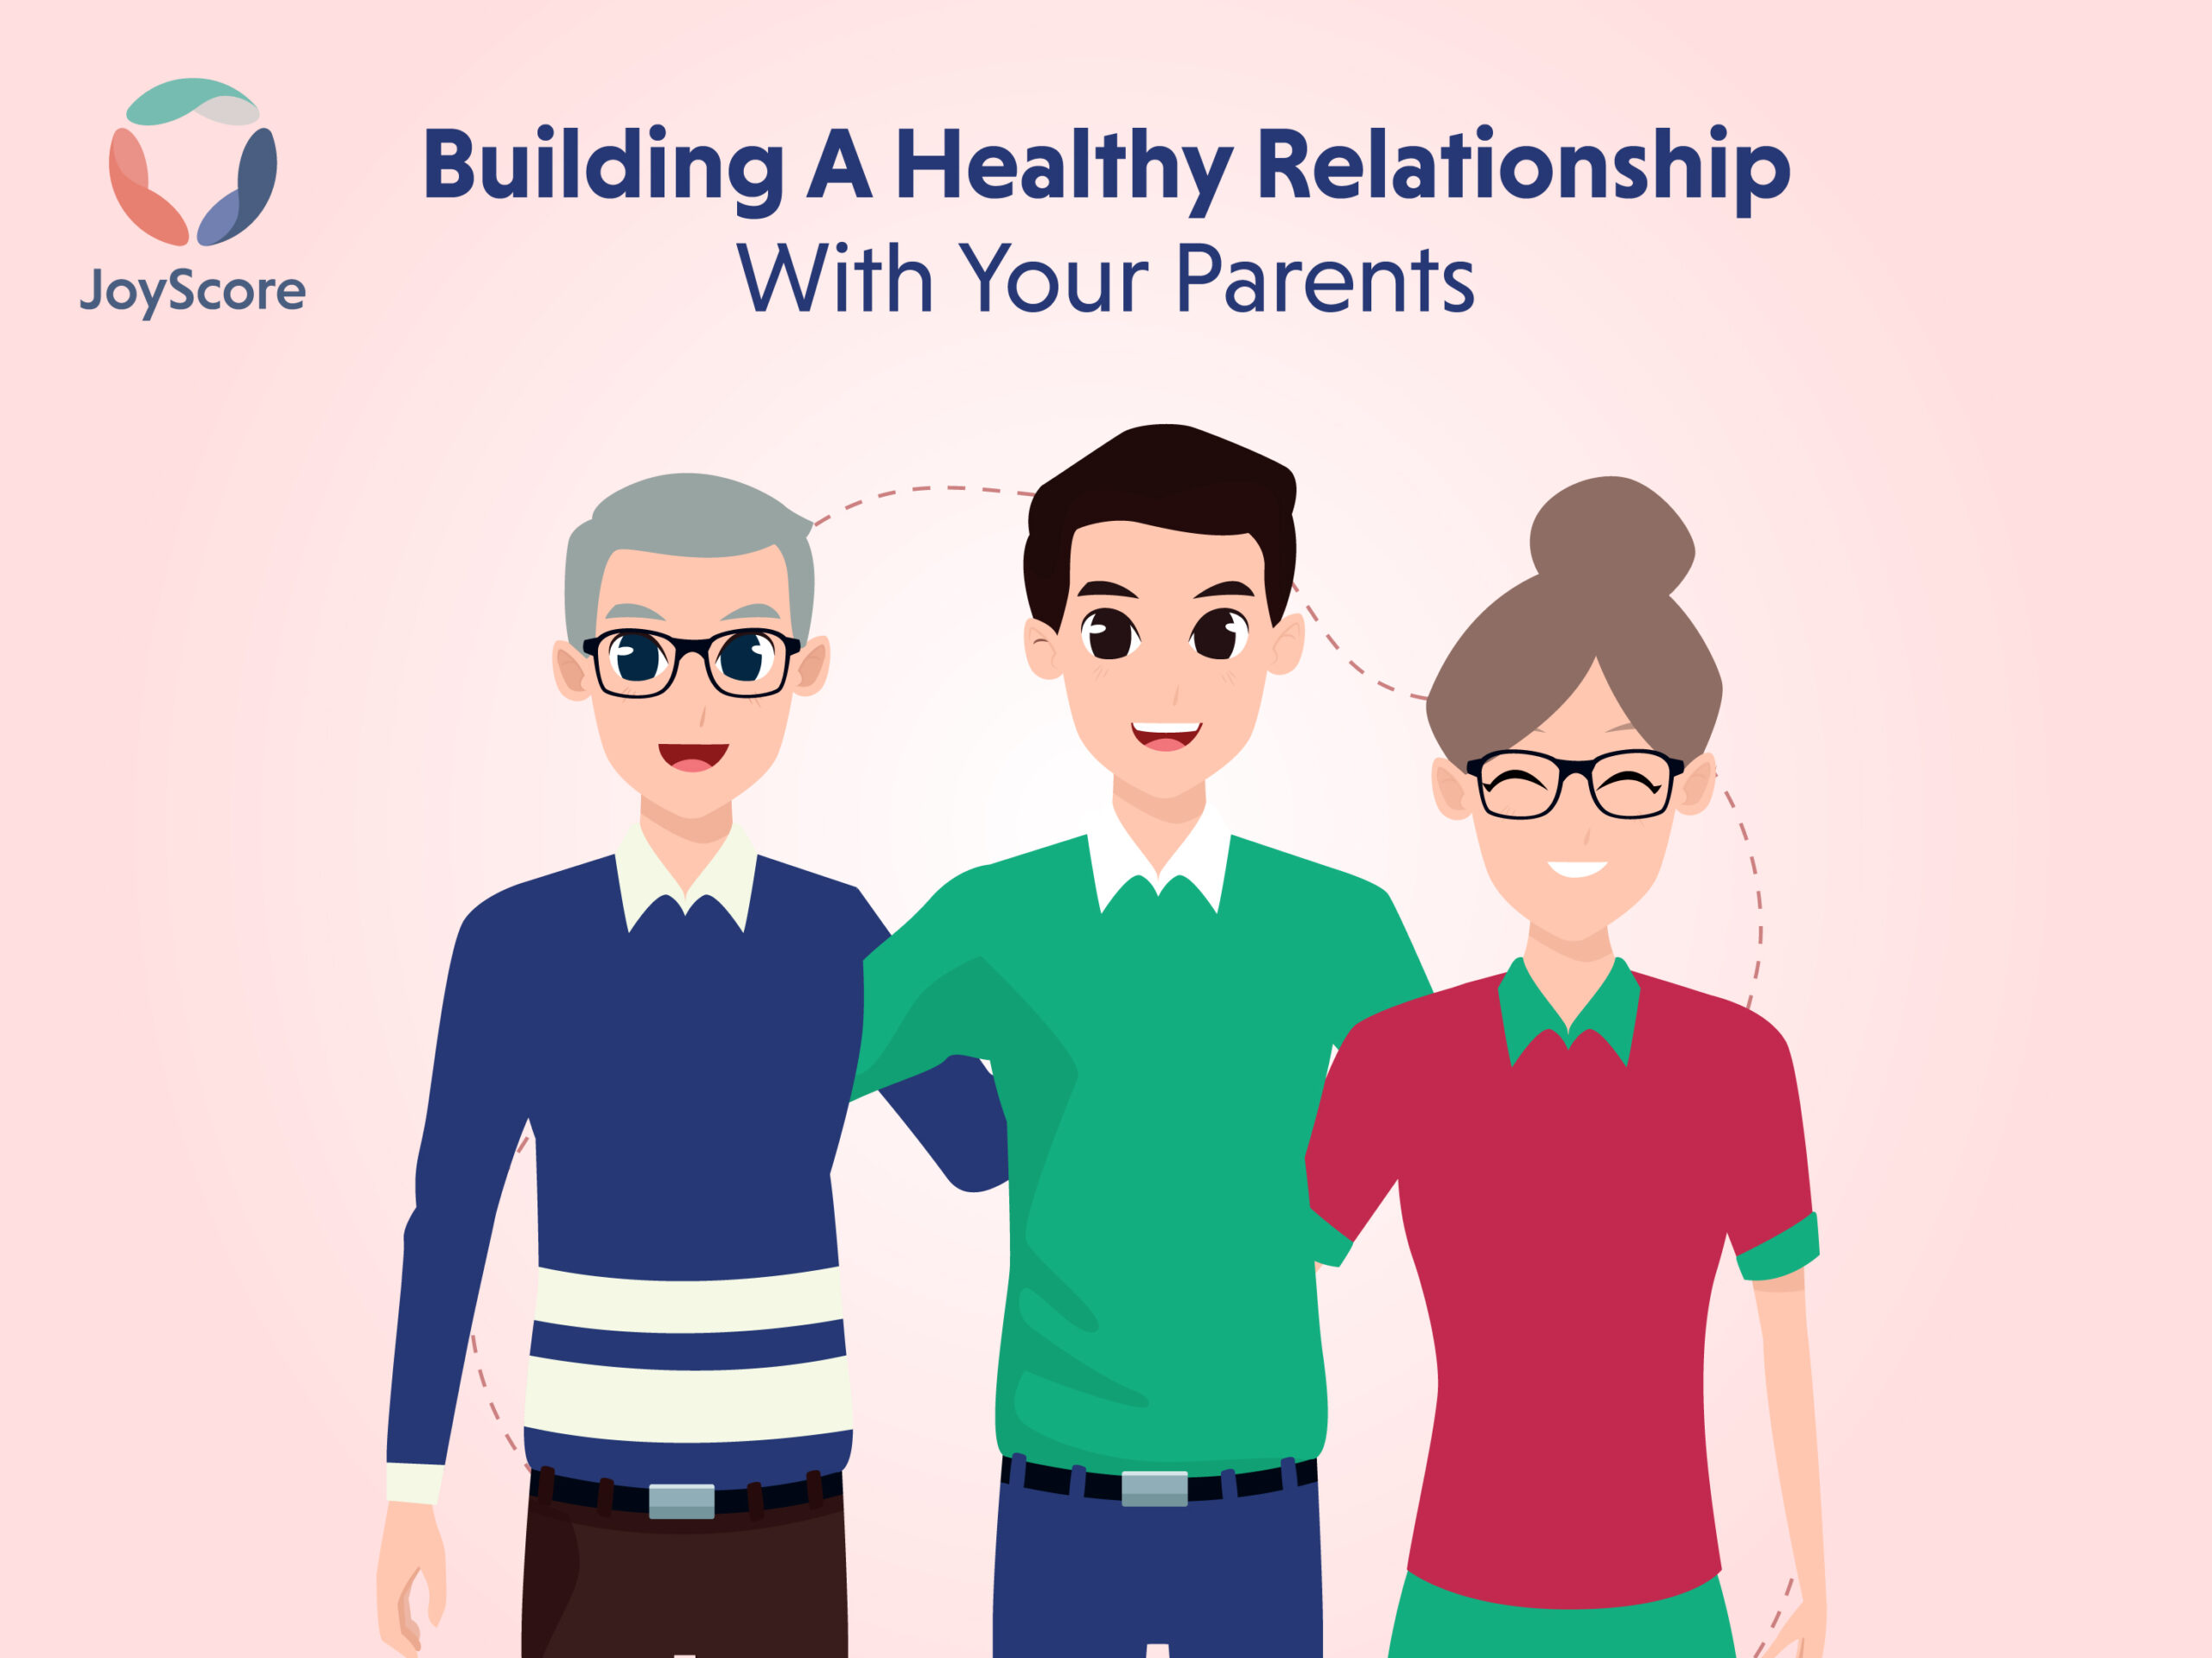 How to Build a Healthy Relationship with Your Parents